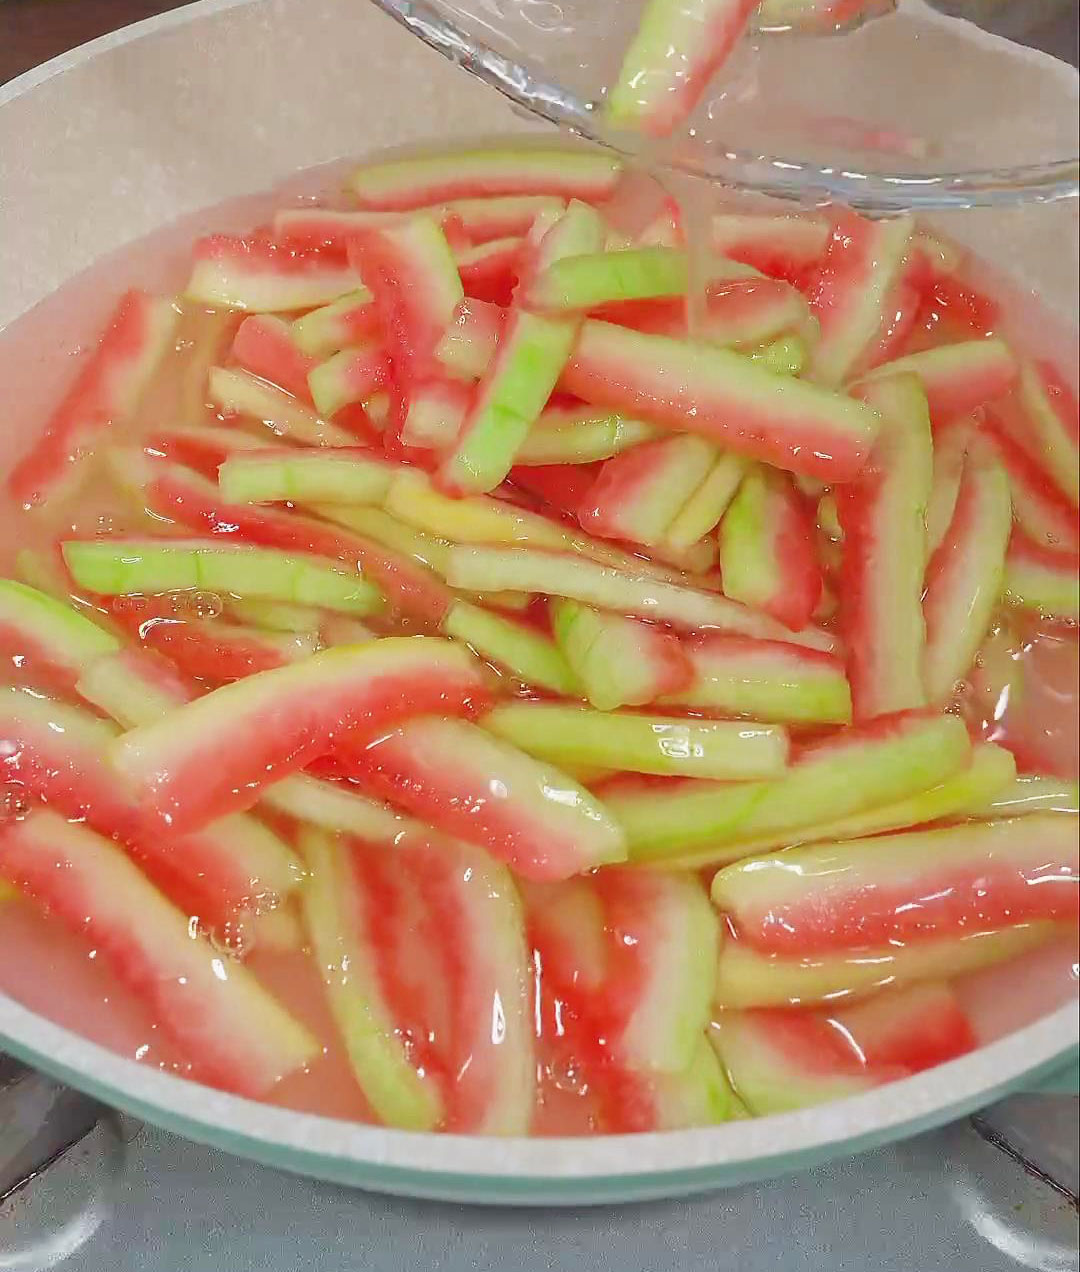 put the watermelon rinds in the cooking pot